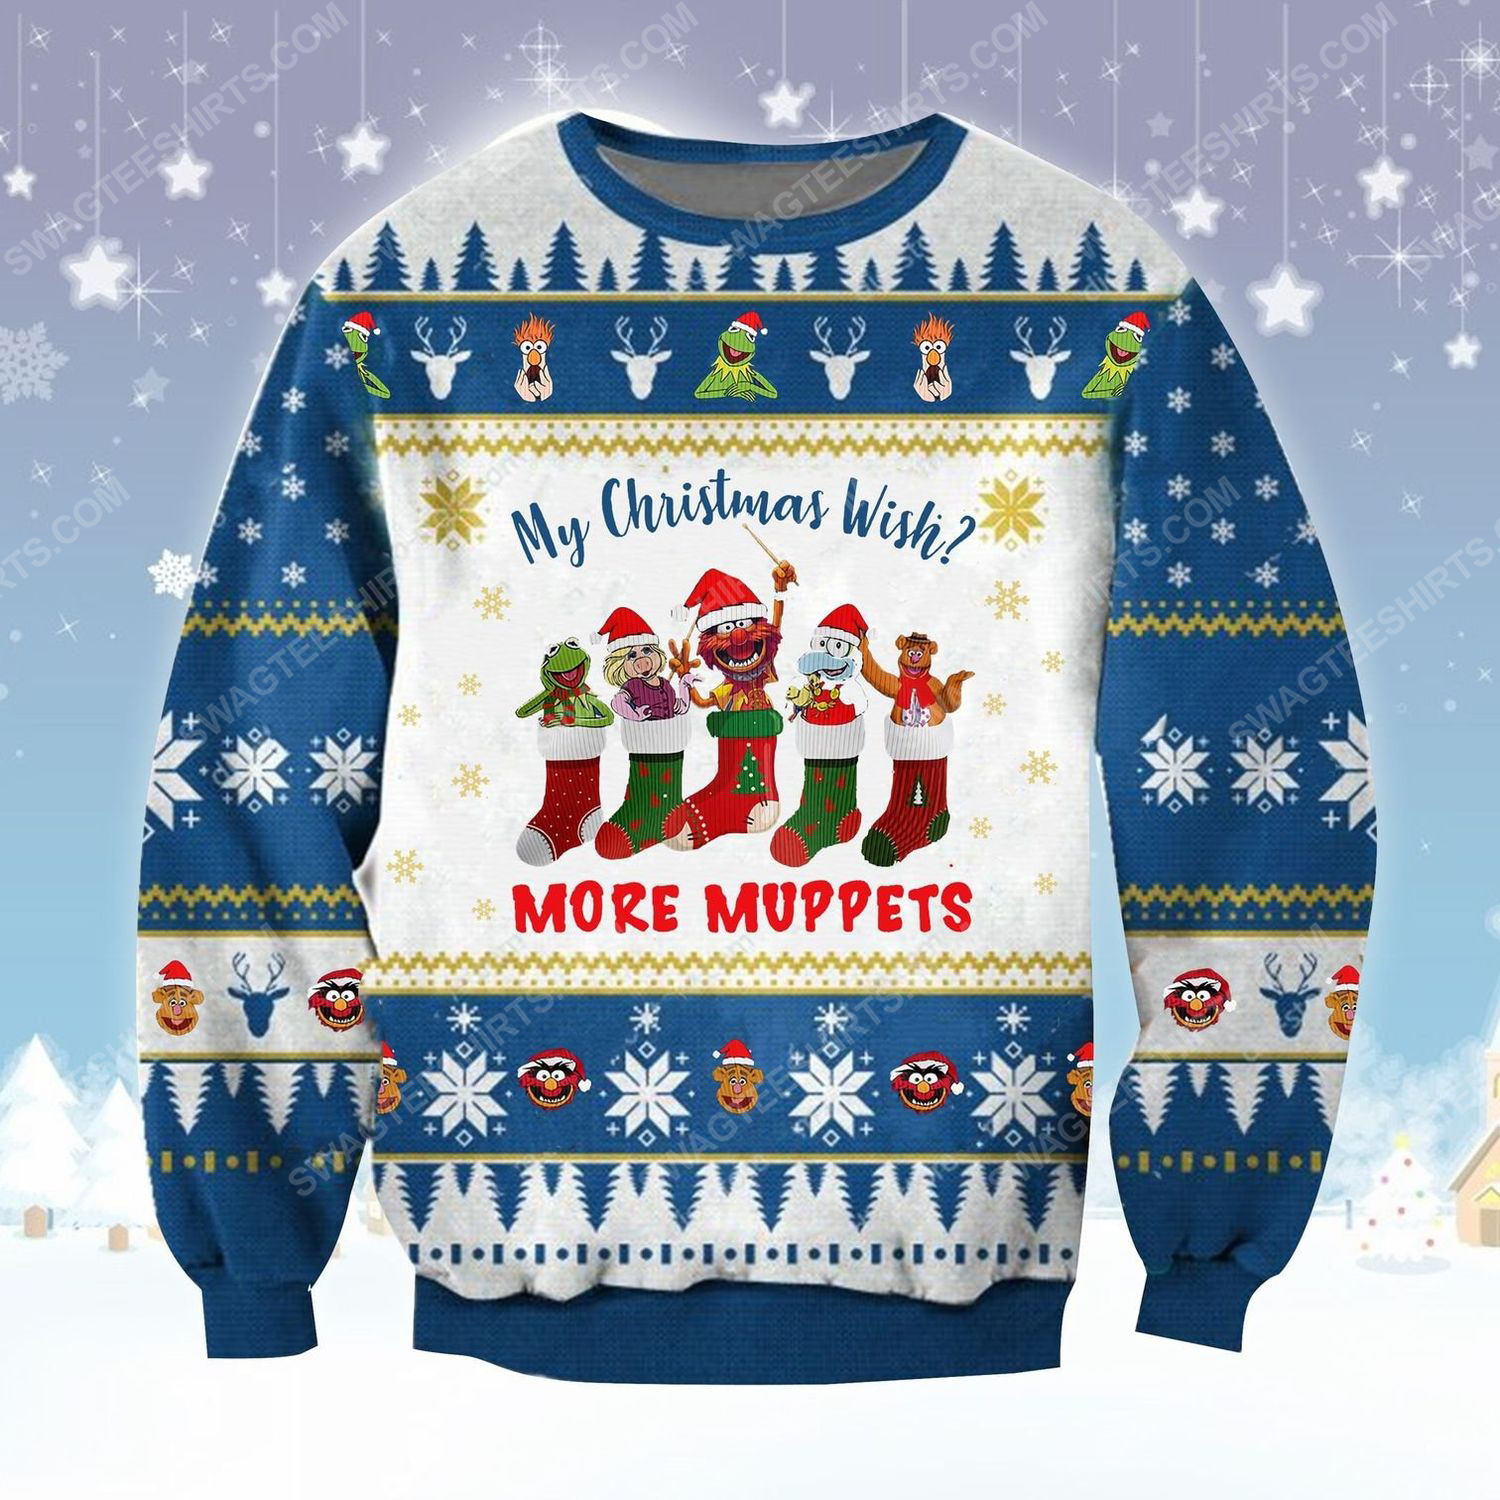 My christmas wish more muppets ugly christmas sweater